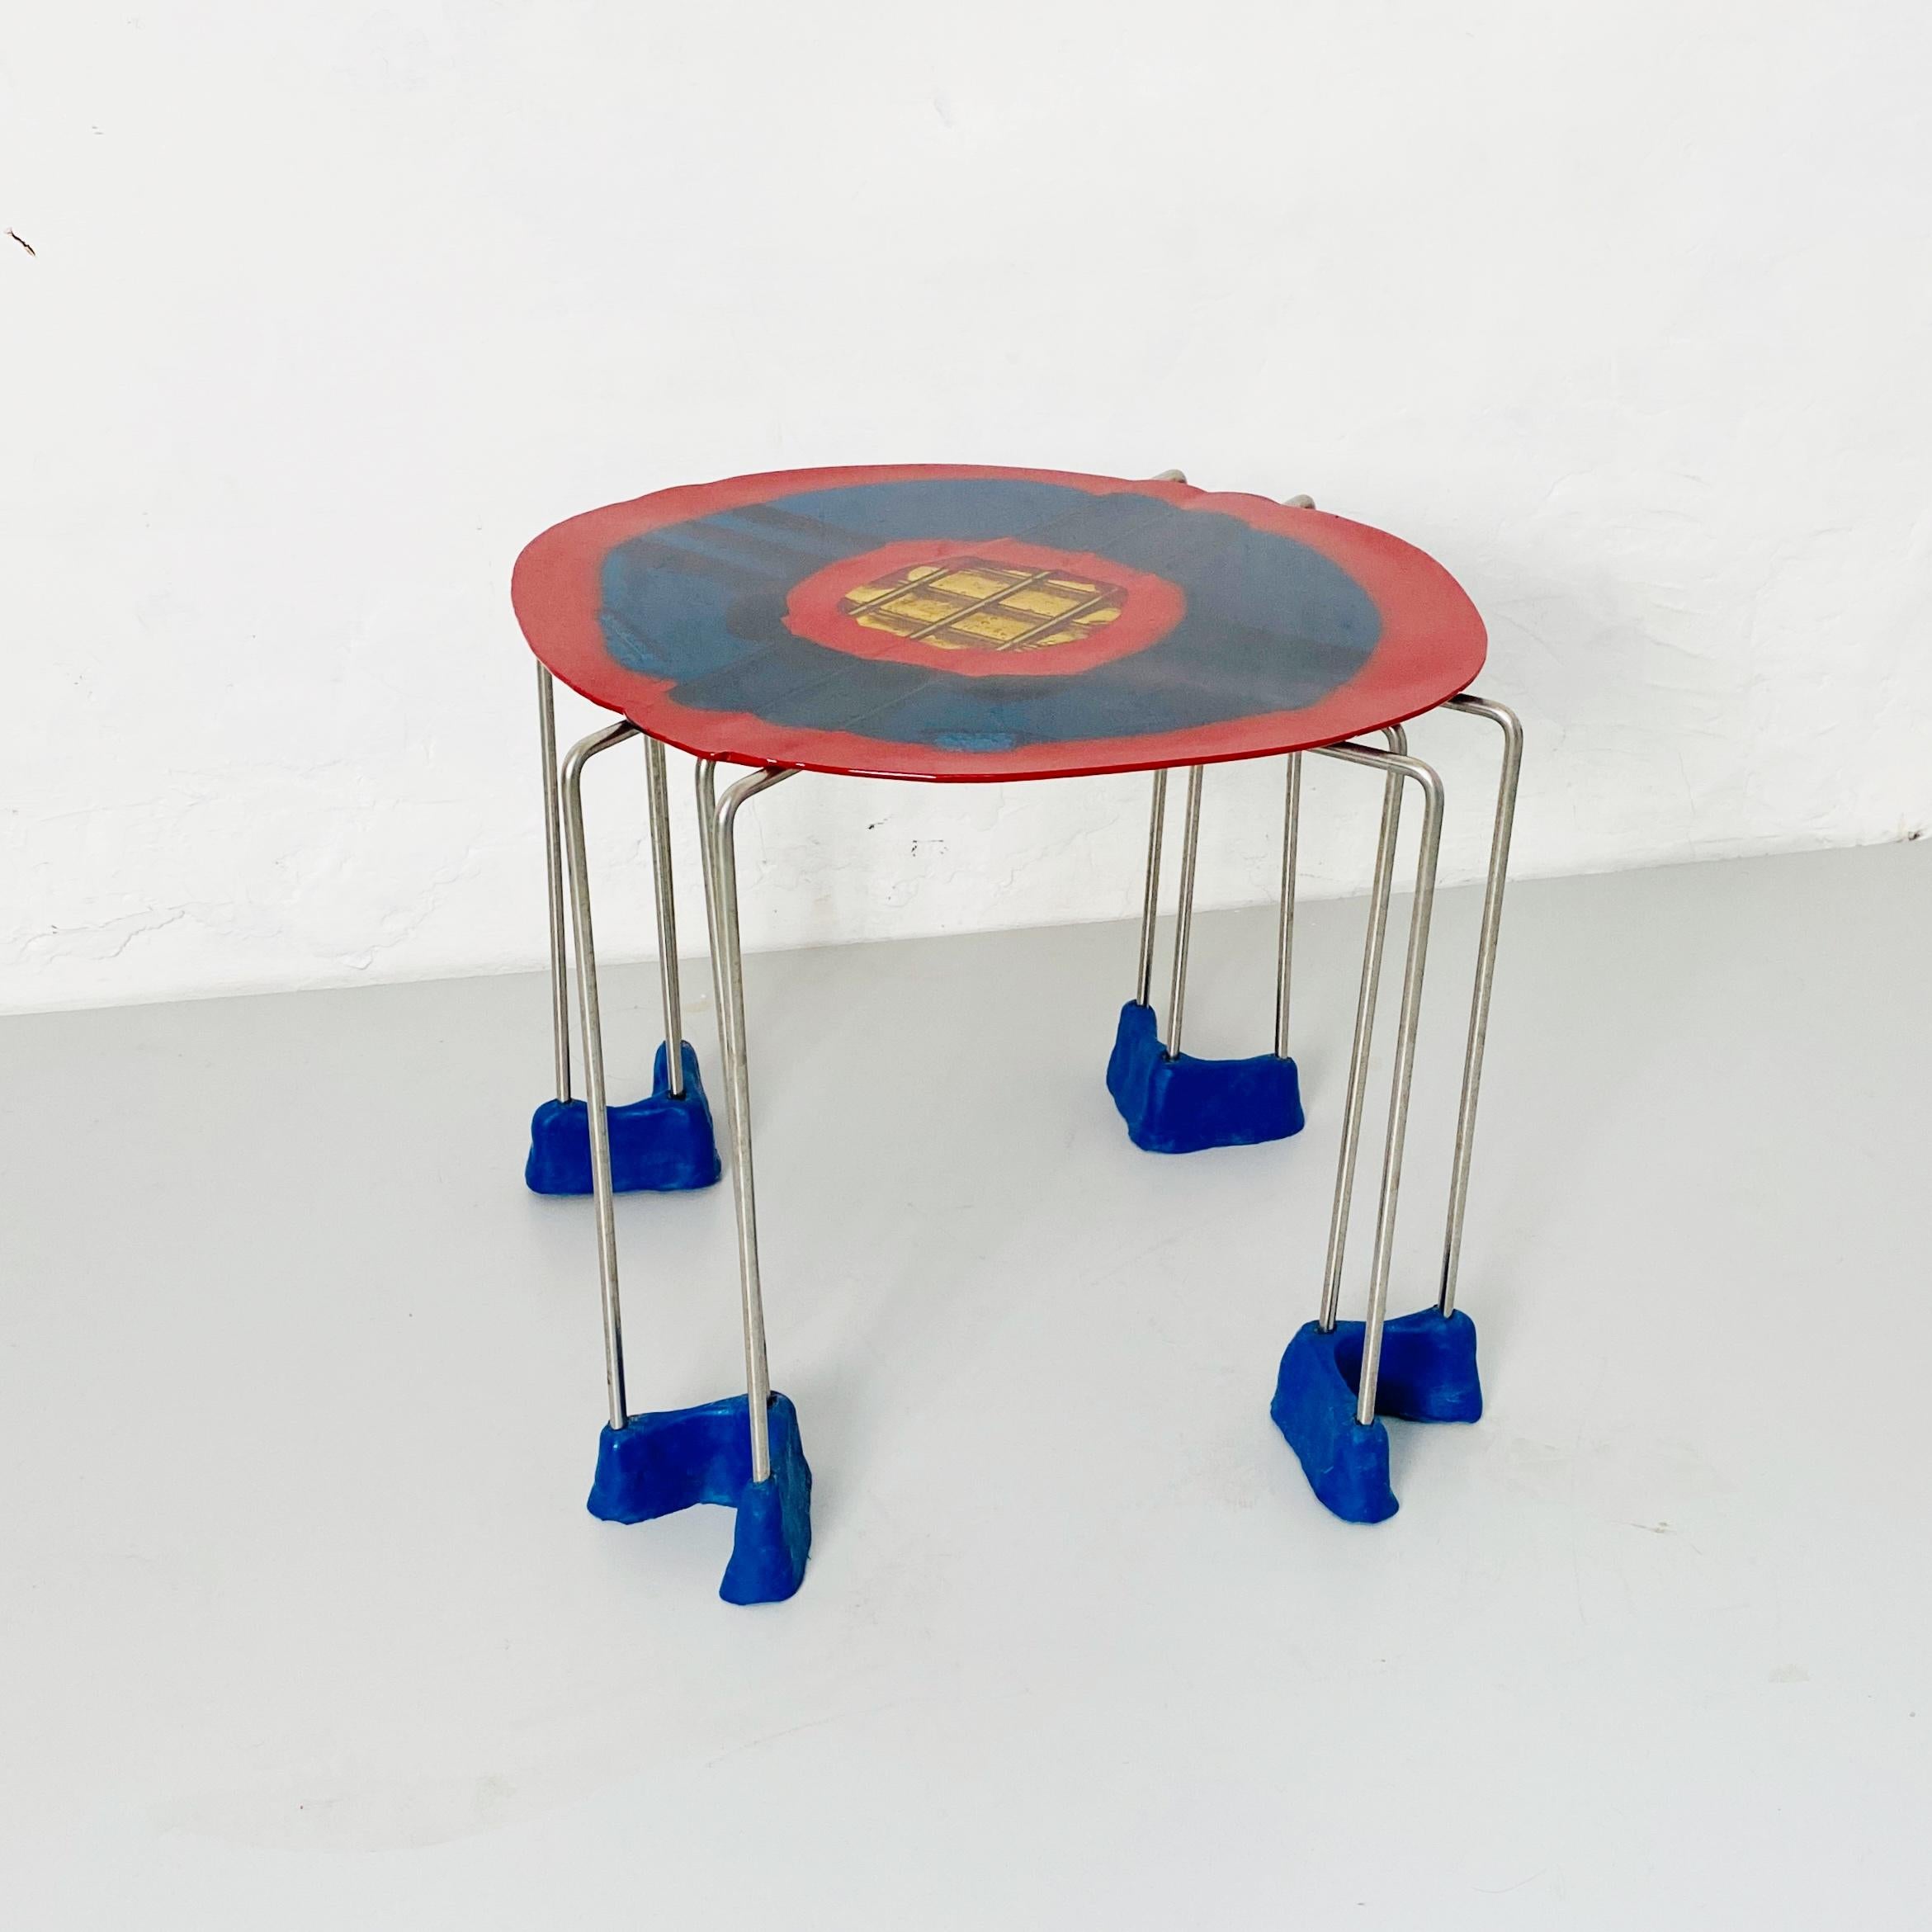 Contemporary Italian Blue Triple Play Resin Stool by Gaetano Pesce for Fish Design, 2000s